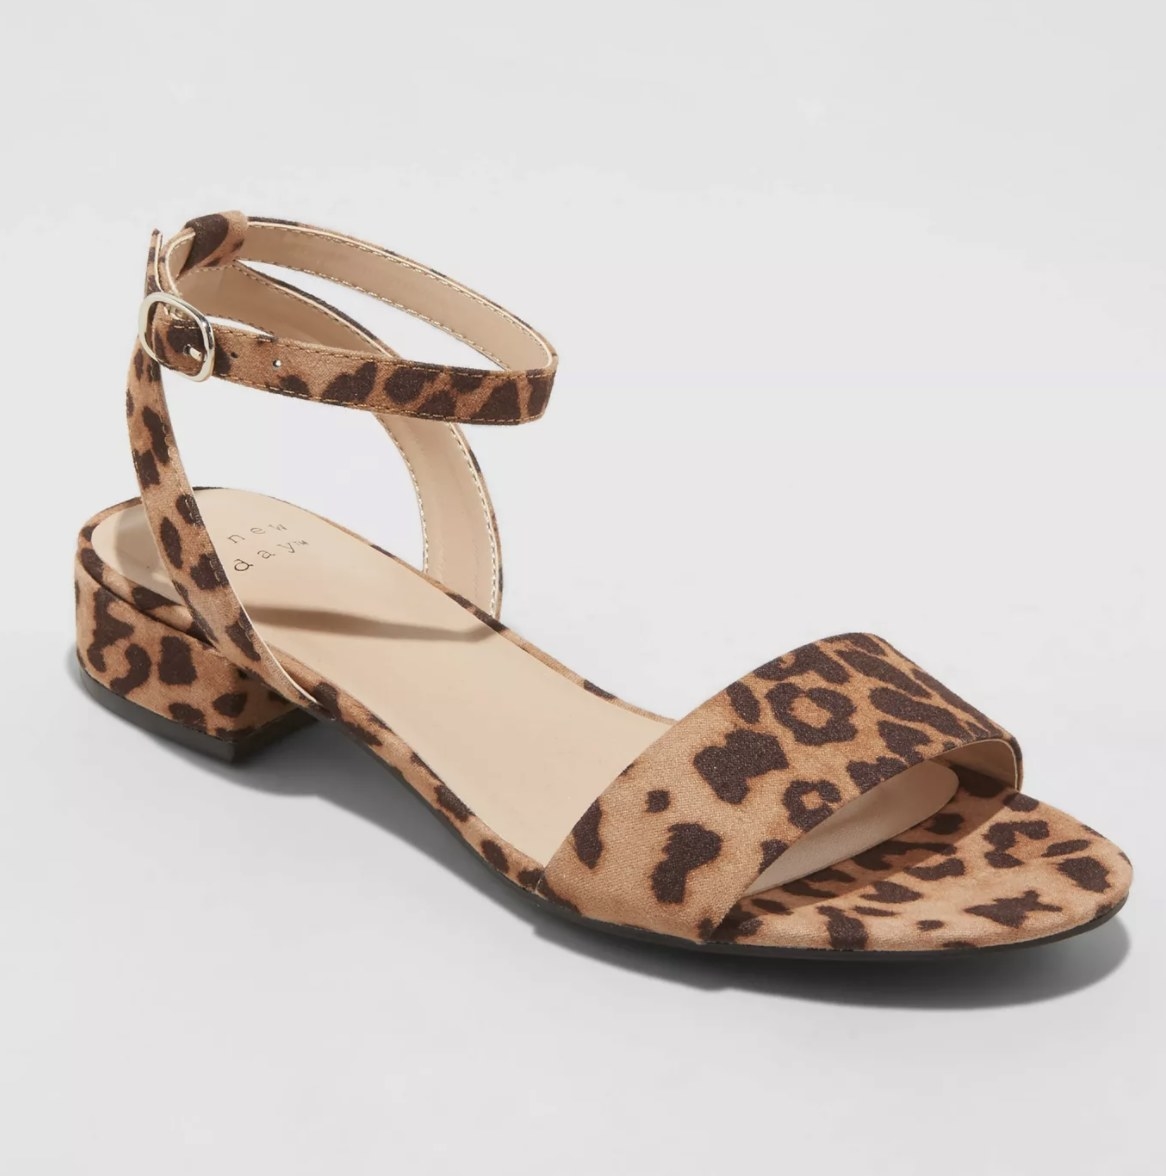 The leopard patterned sandal has a slight heel and cute strappy additions around the ankle